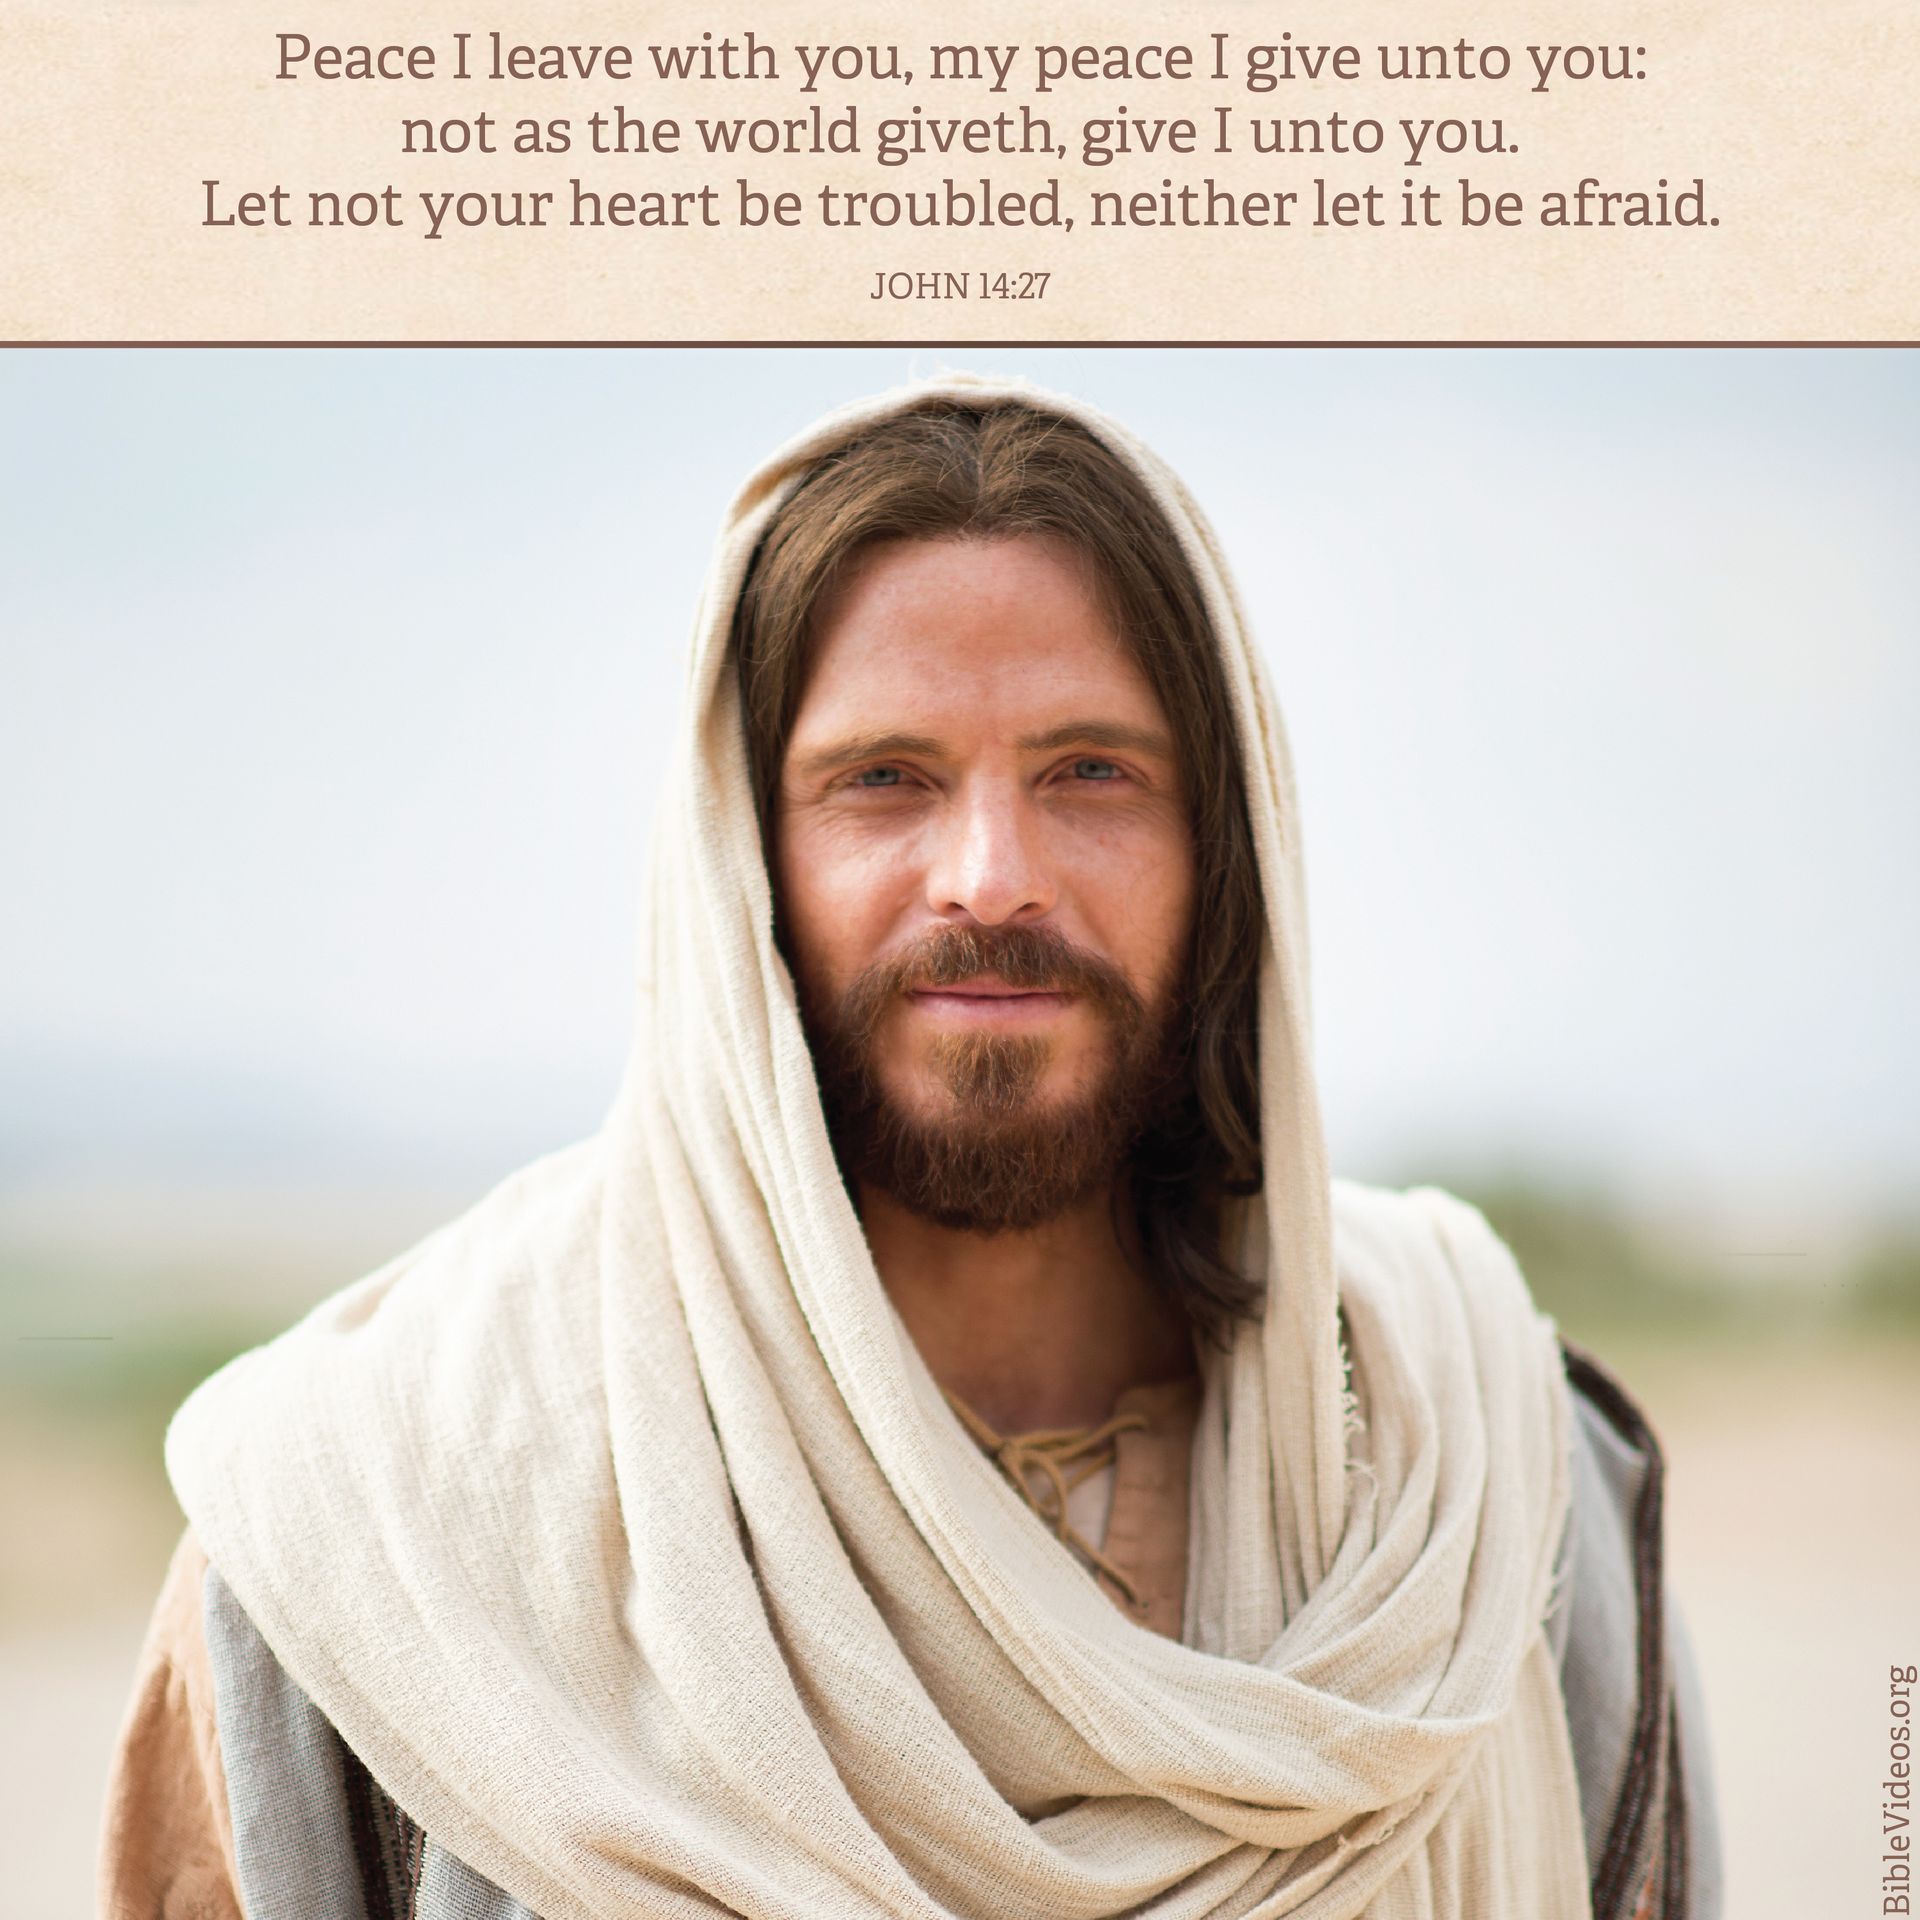 “Peace I leave with you, my peace I give unto you: not as the world giveth, give I unto you. Let not your heart be troubled, neither let it be afraid.”—John 14:27